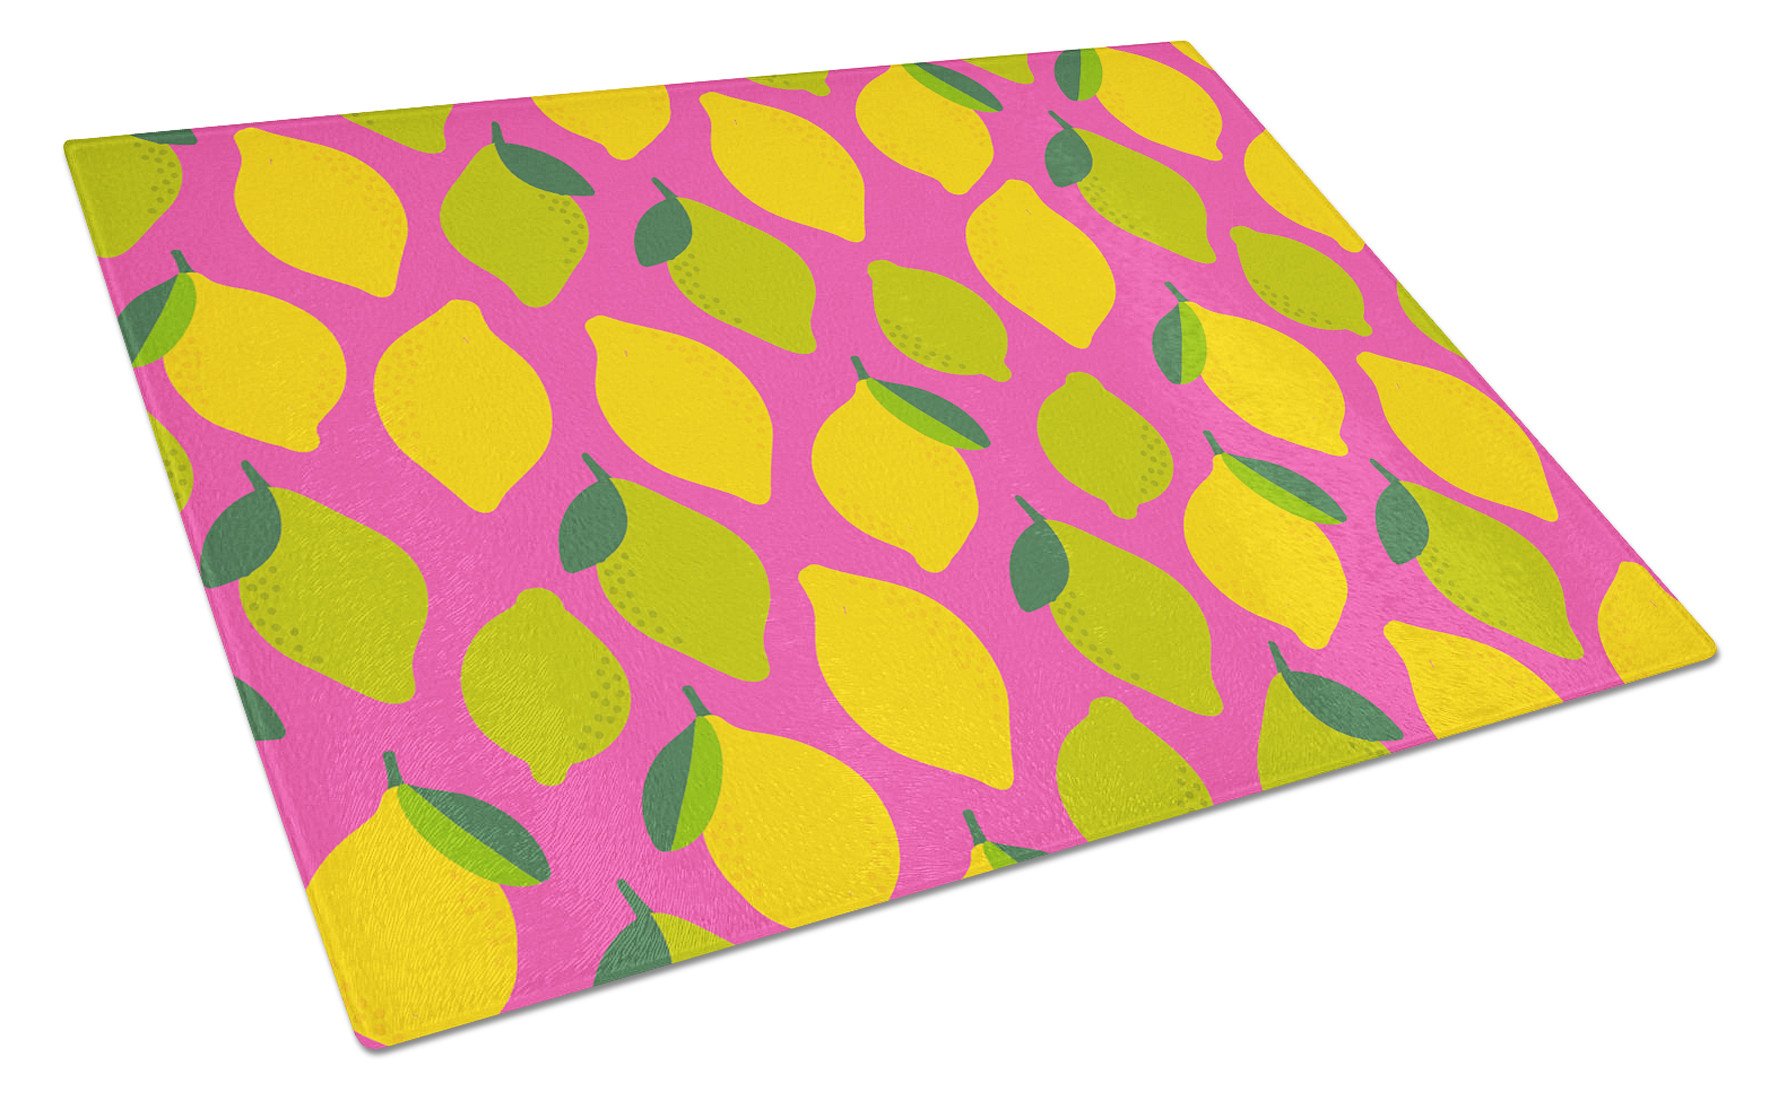 Lemons and Limes on Pink Glass Cutting Board Large BB5143LCB by Caroline's Treasures